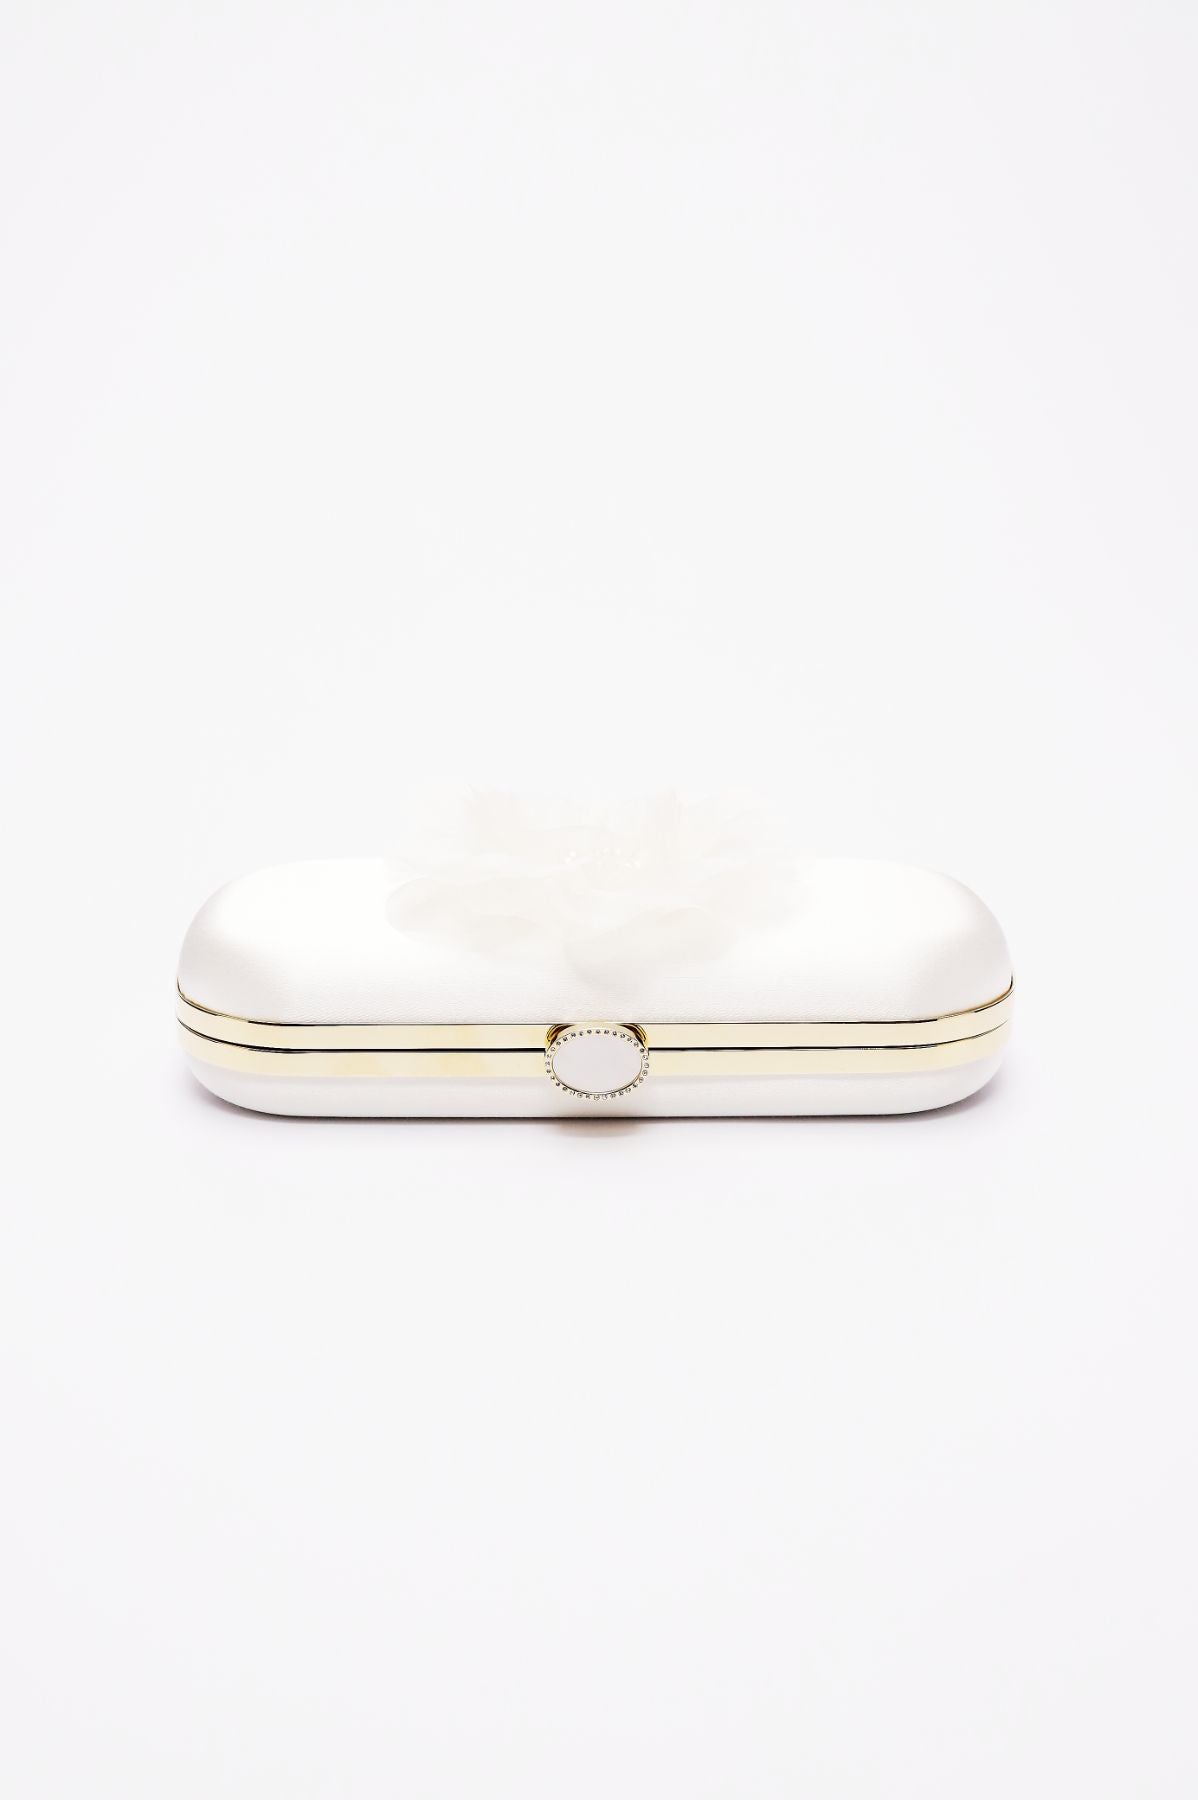 Grande Ivory Bella Fiori Clutch by The Bella Rosa Collection with floral detail and gold trim on a plain background, perfect black-tie accessory.